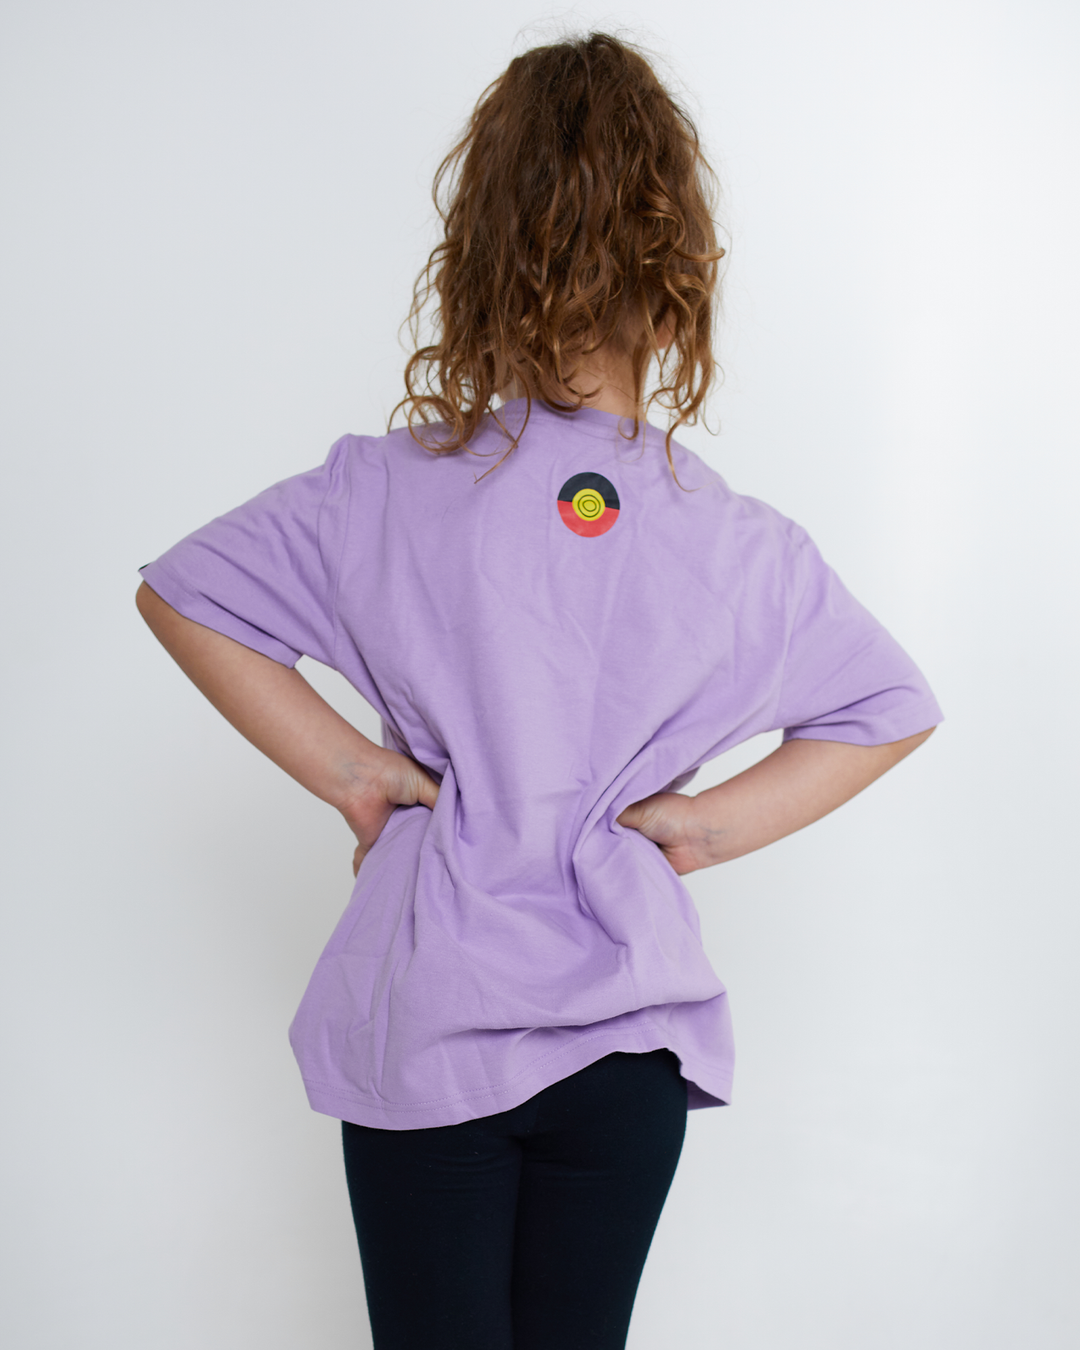 Clothing The Gaps. KIDS Ltd Ed. Lilac 'Always Was, Always Will Be' Tee. Light lilac purple died t-shirt. With a Black, yellow and red 'always was always will be' text screen printed in left corner pocket sized.